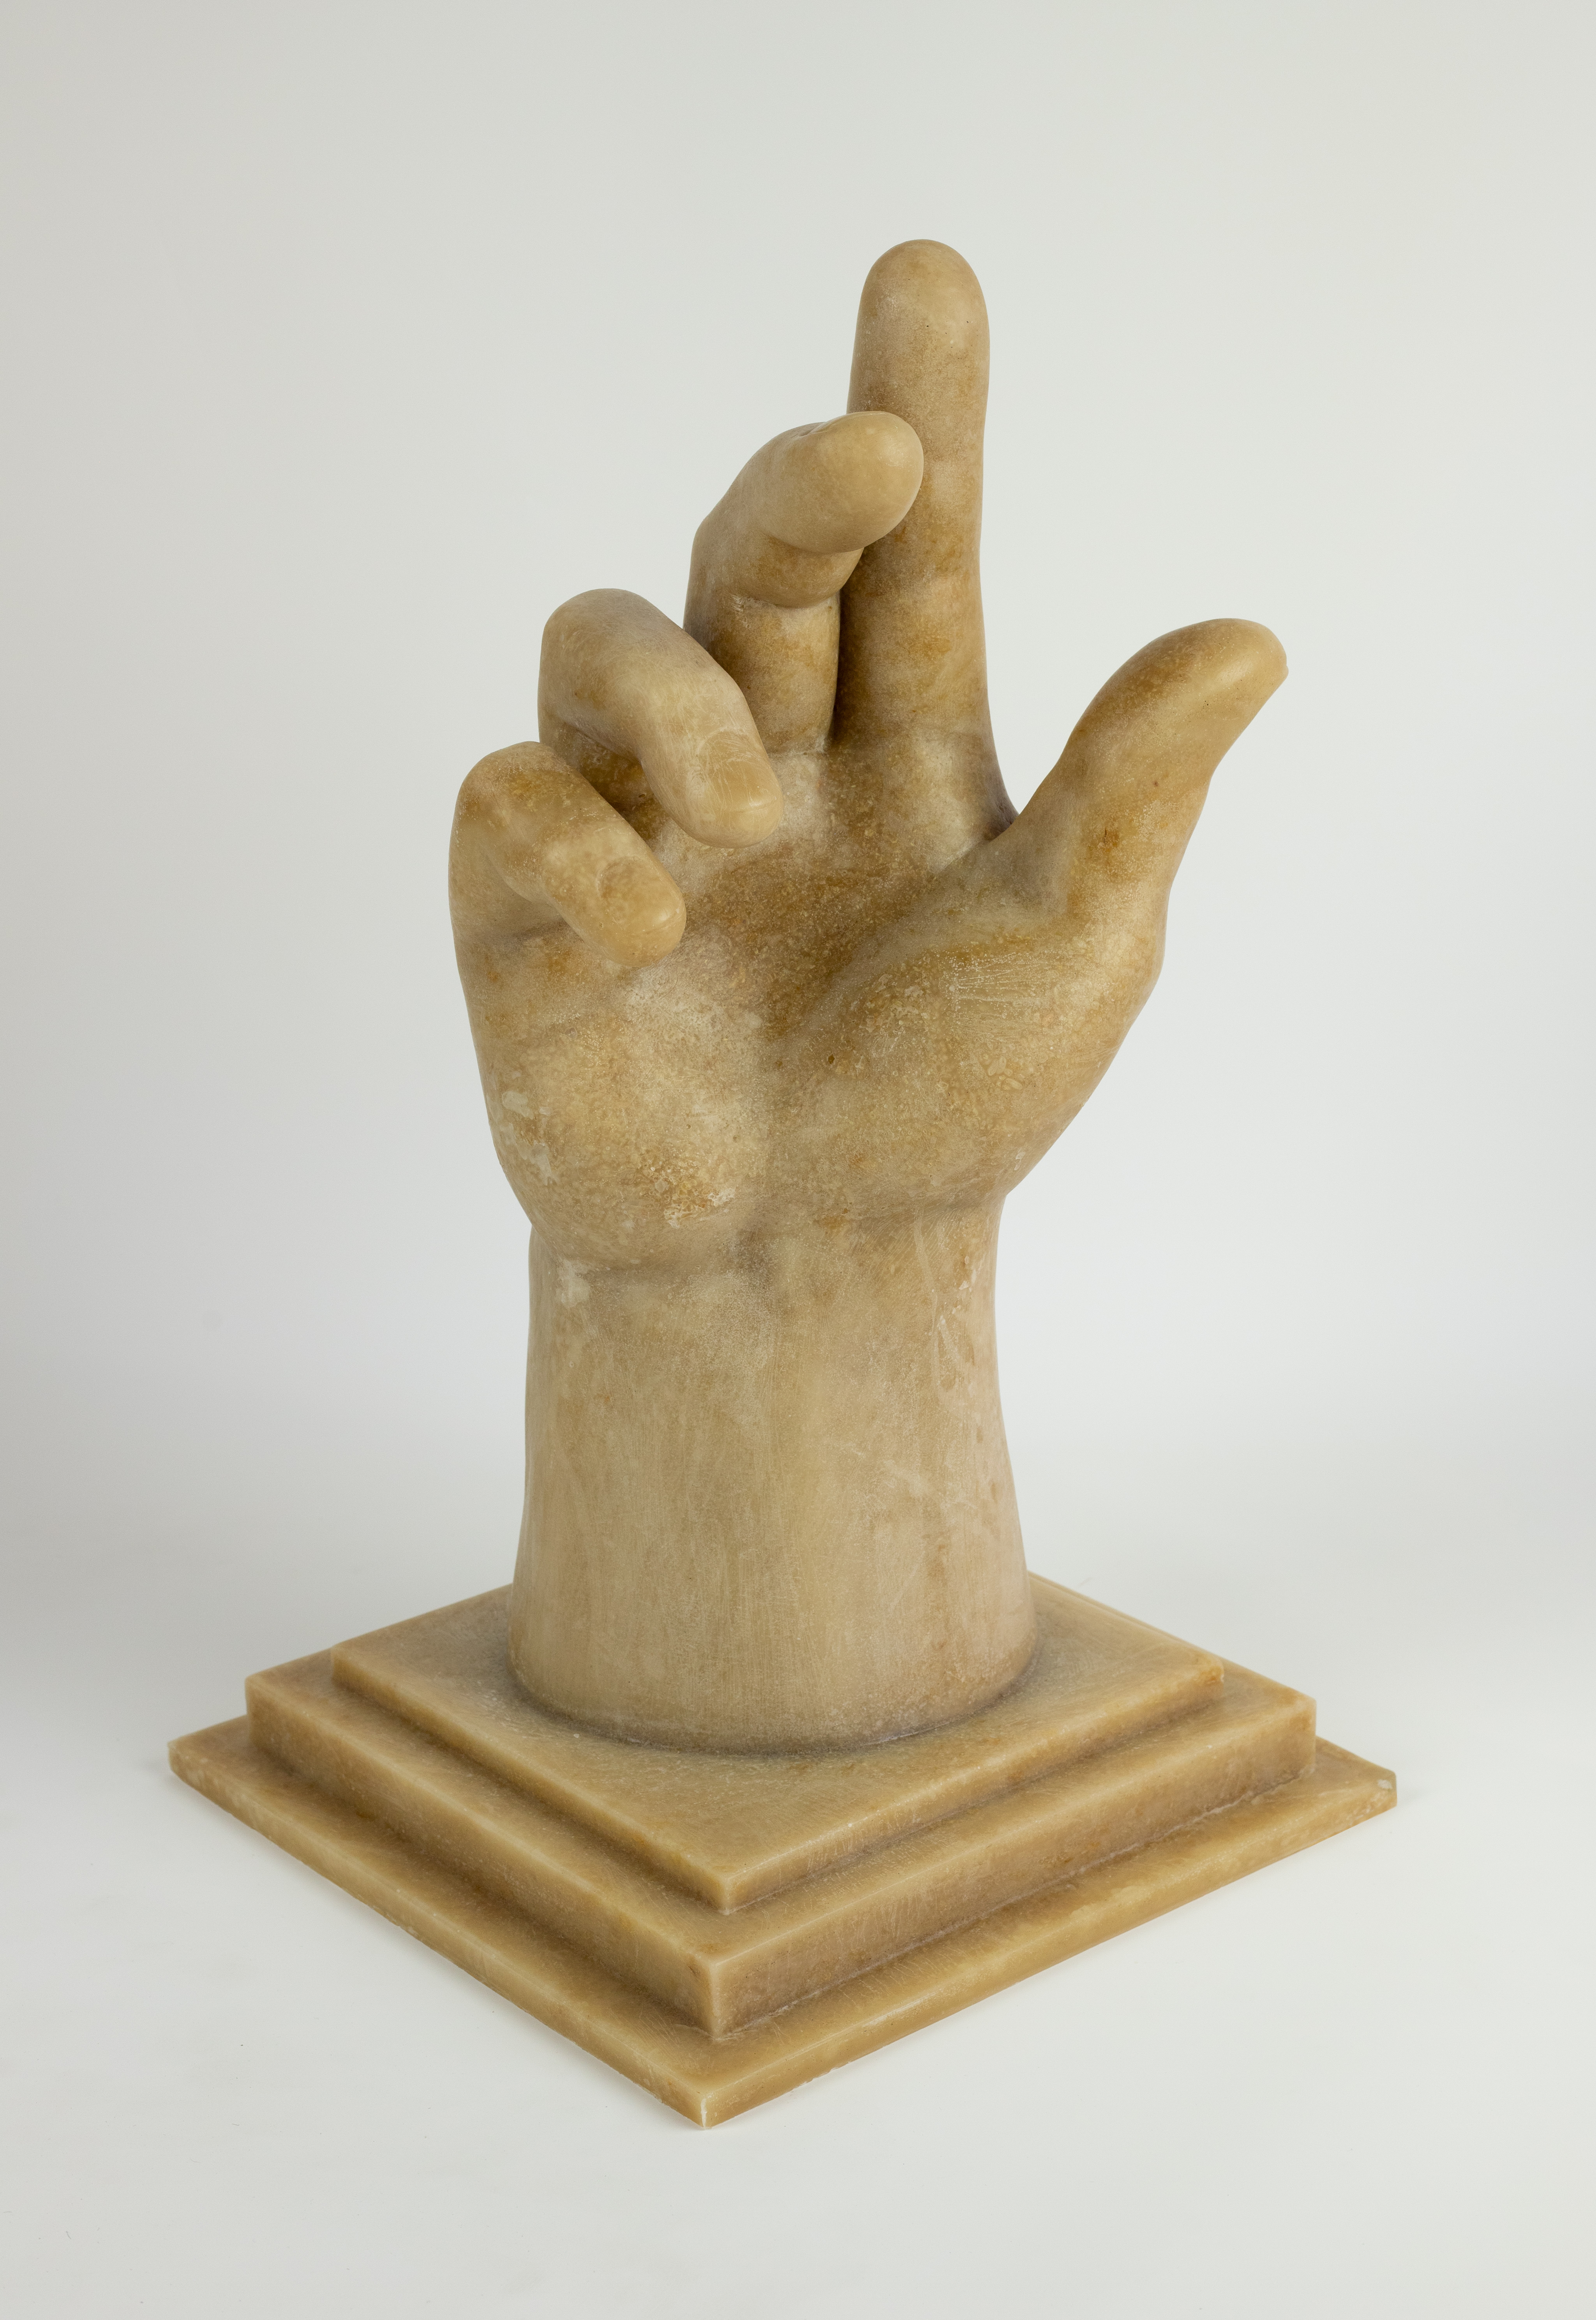 A brown colored sculpted hand with a square base posed in a slightly opened gesture with the index finger pointing up.